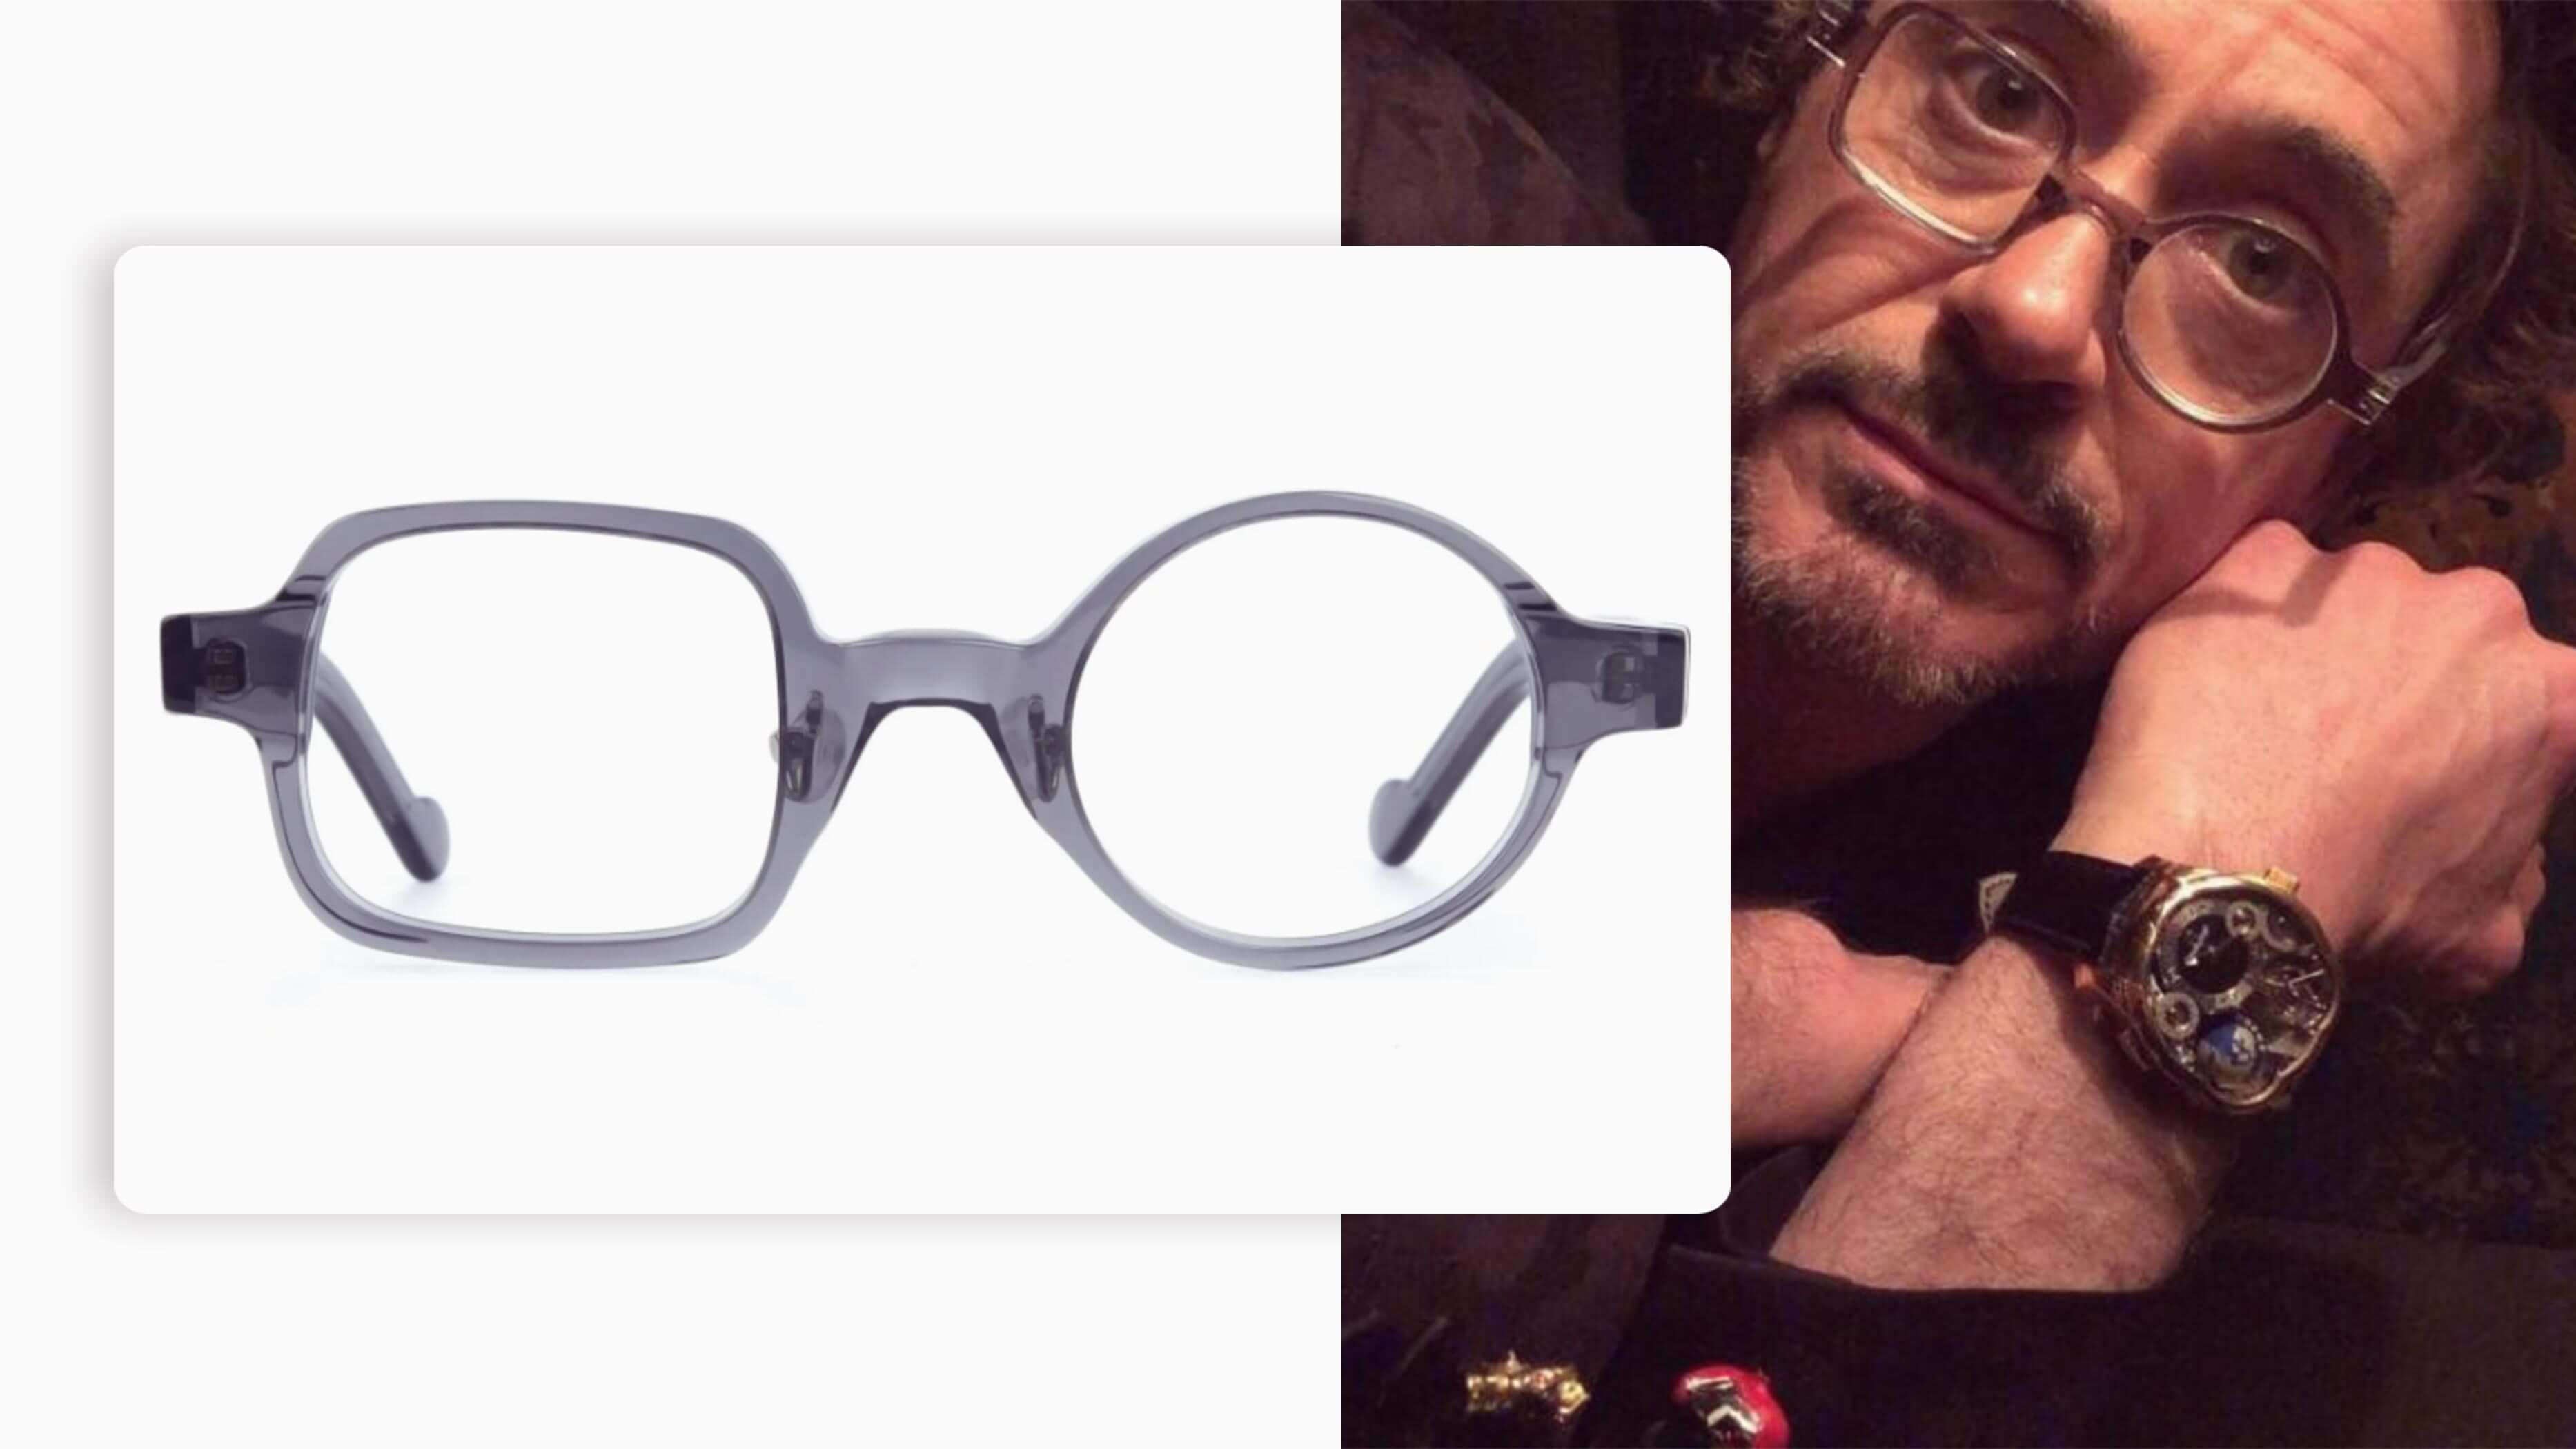 downey stark one round and square glasses